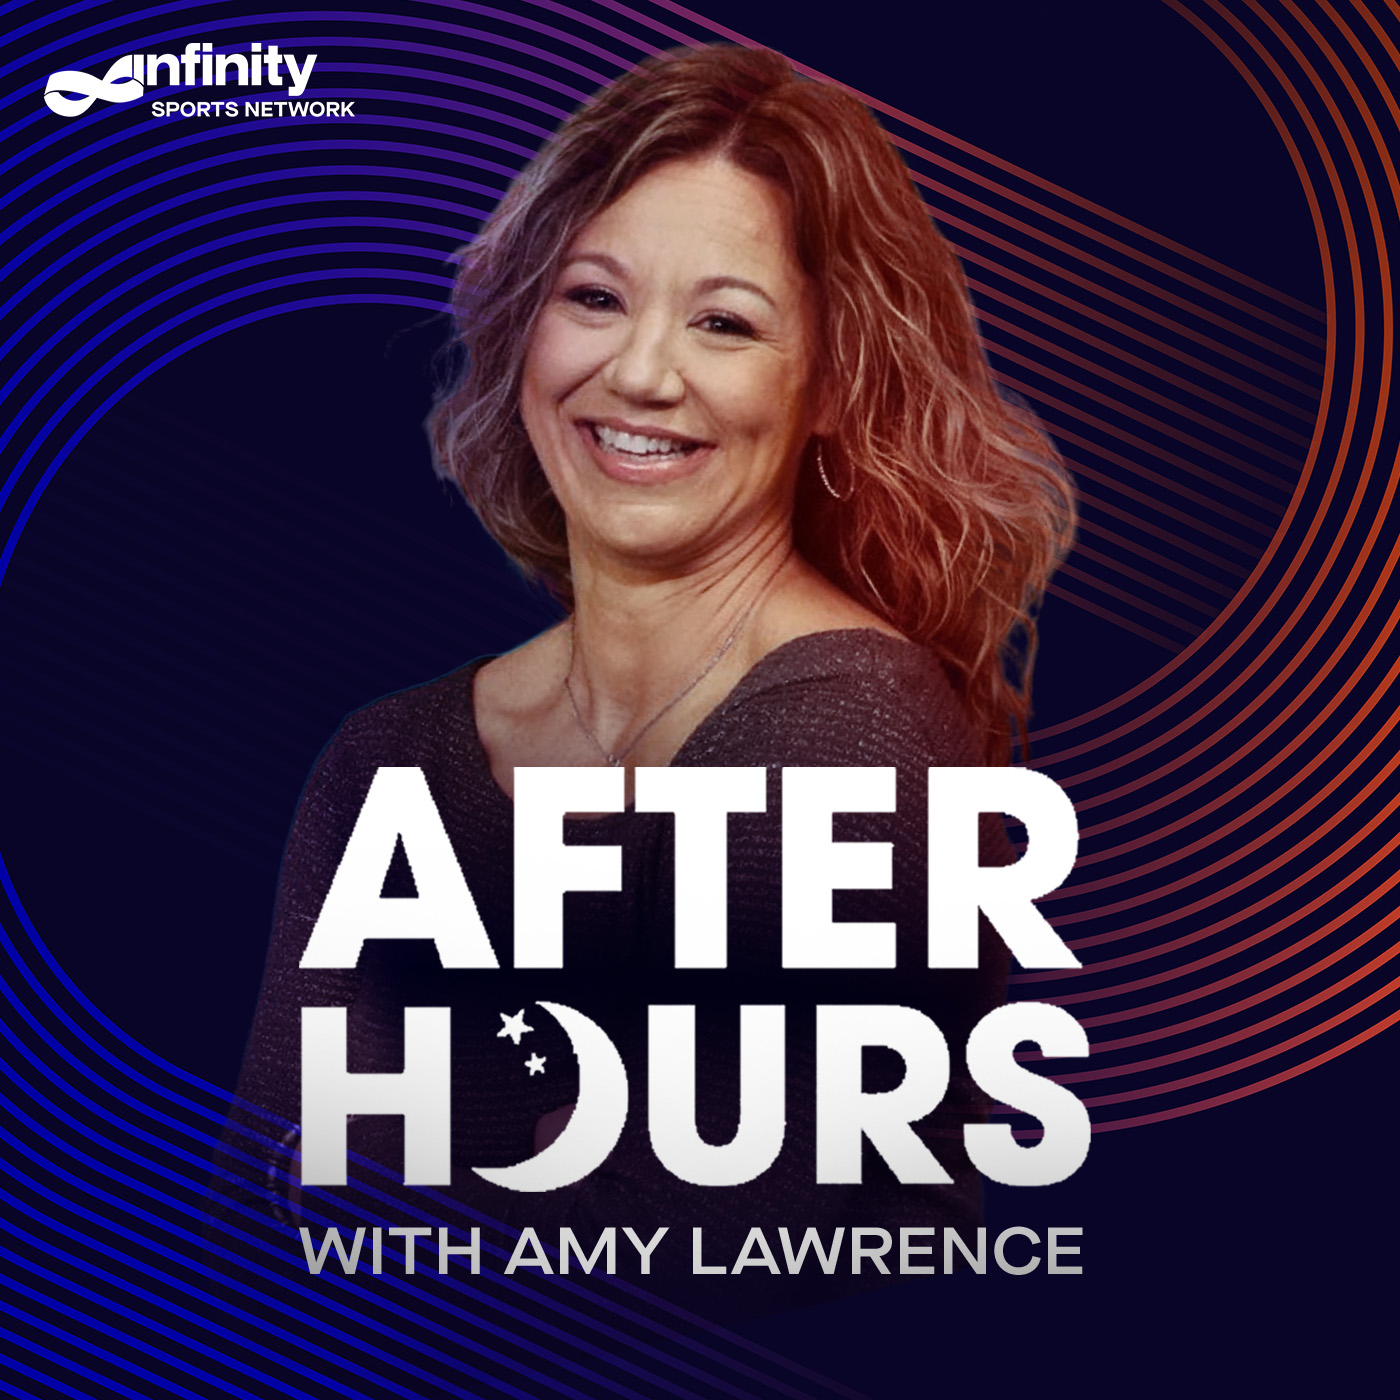 6/14/21 After Hours with Amy Lawrence PODCAST: Hour 4